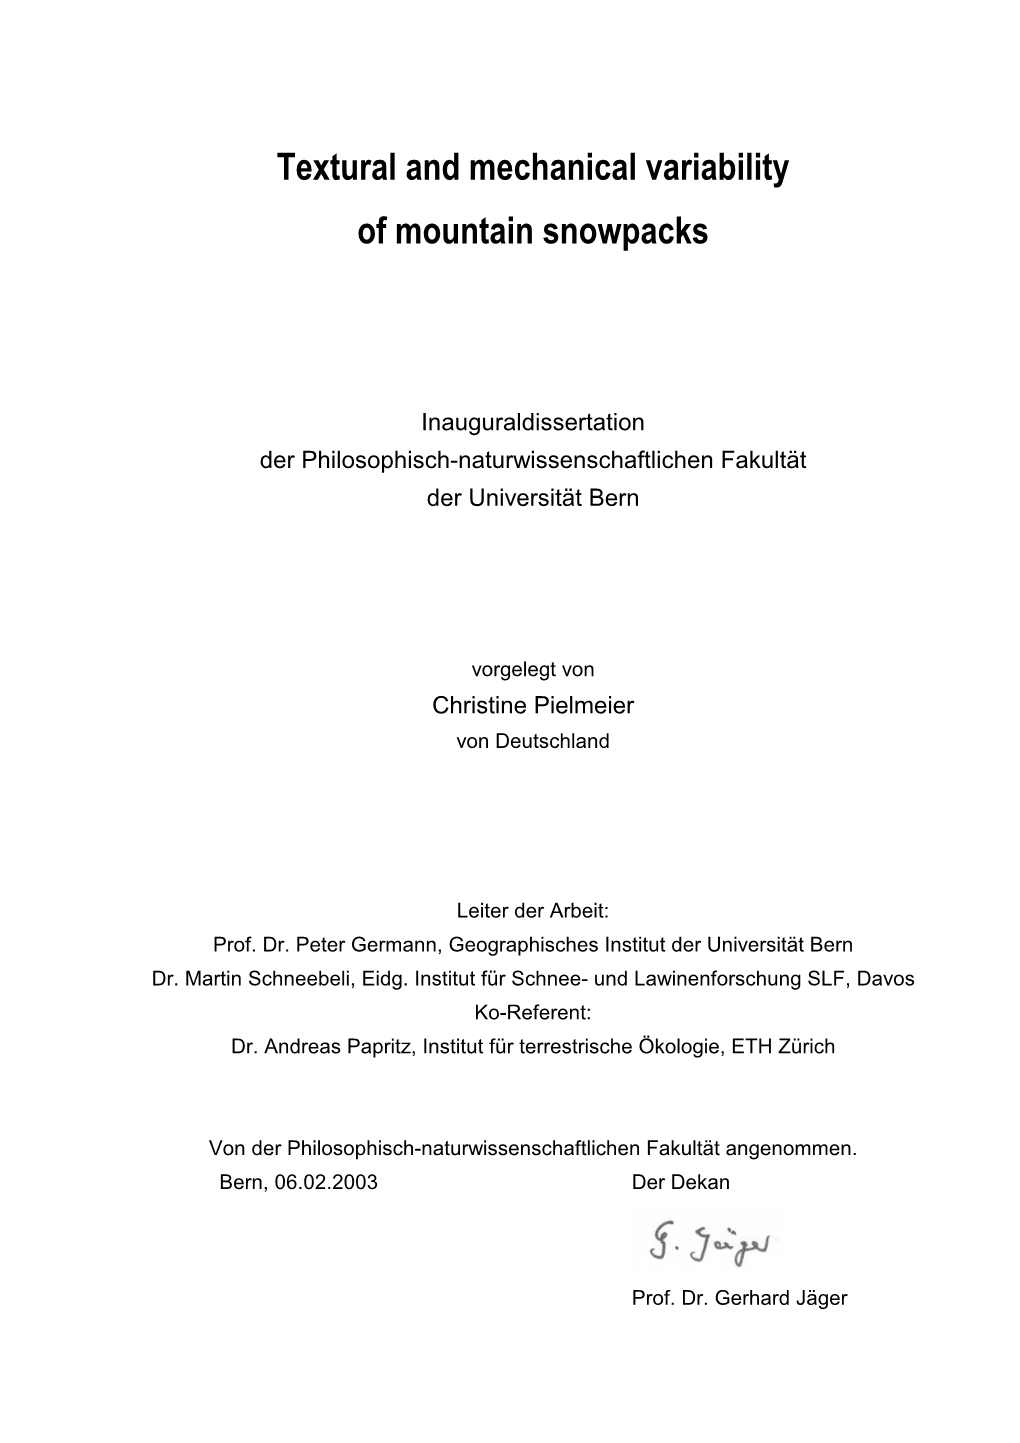 Textural and Mechanical Variability of Mountain Snowpacks